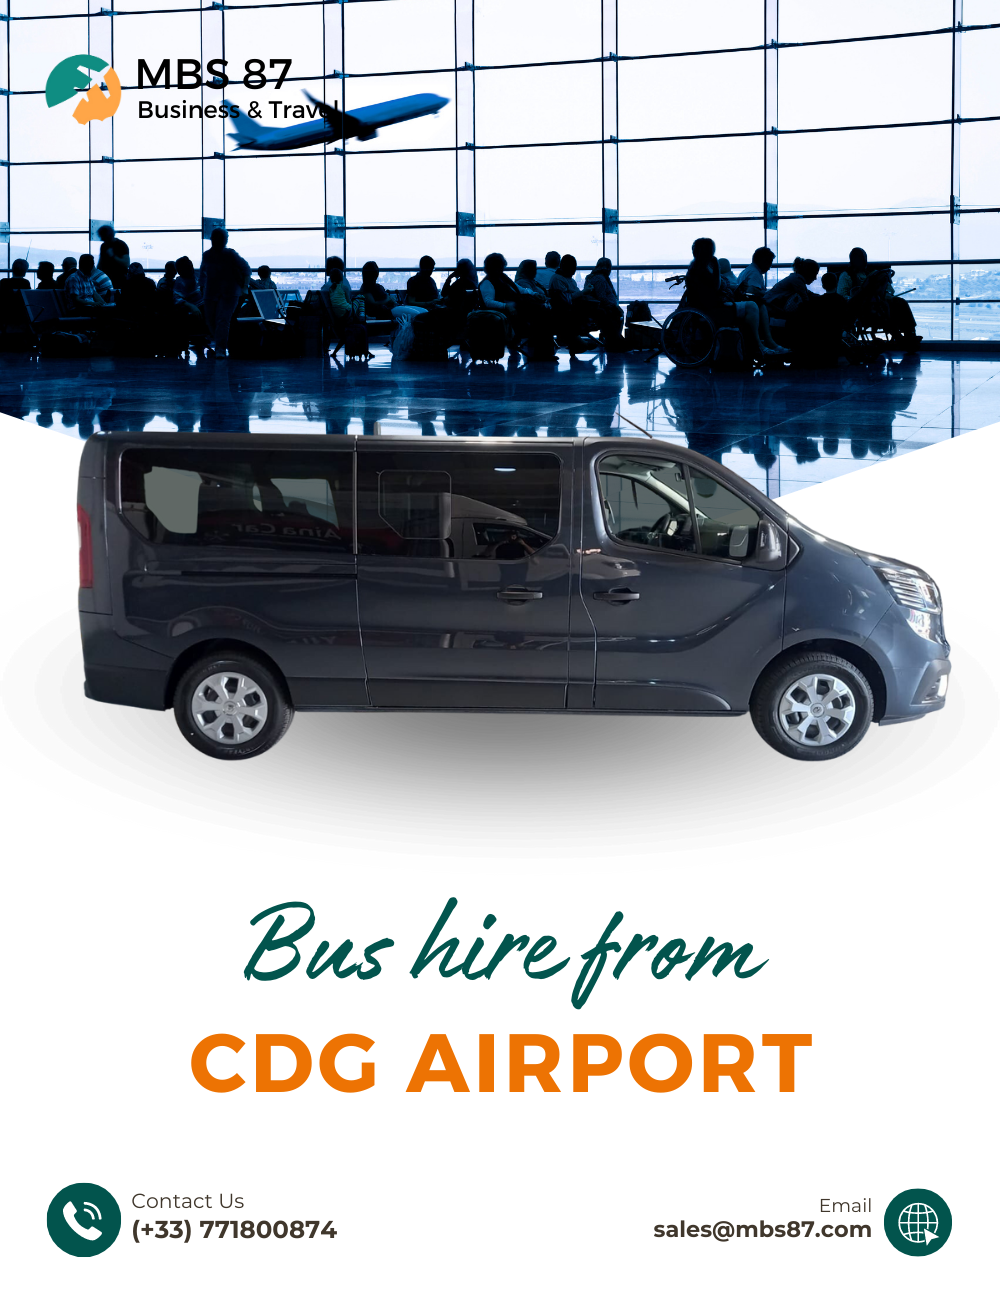 One Way Bus Transfer Service from CDG Airport in Paris